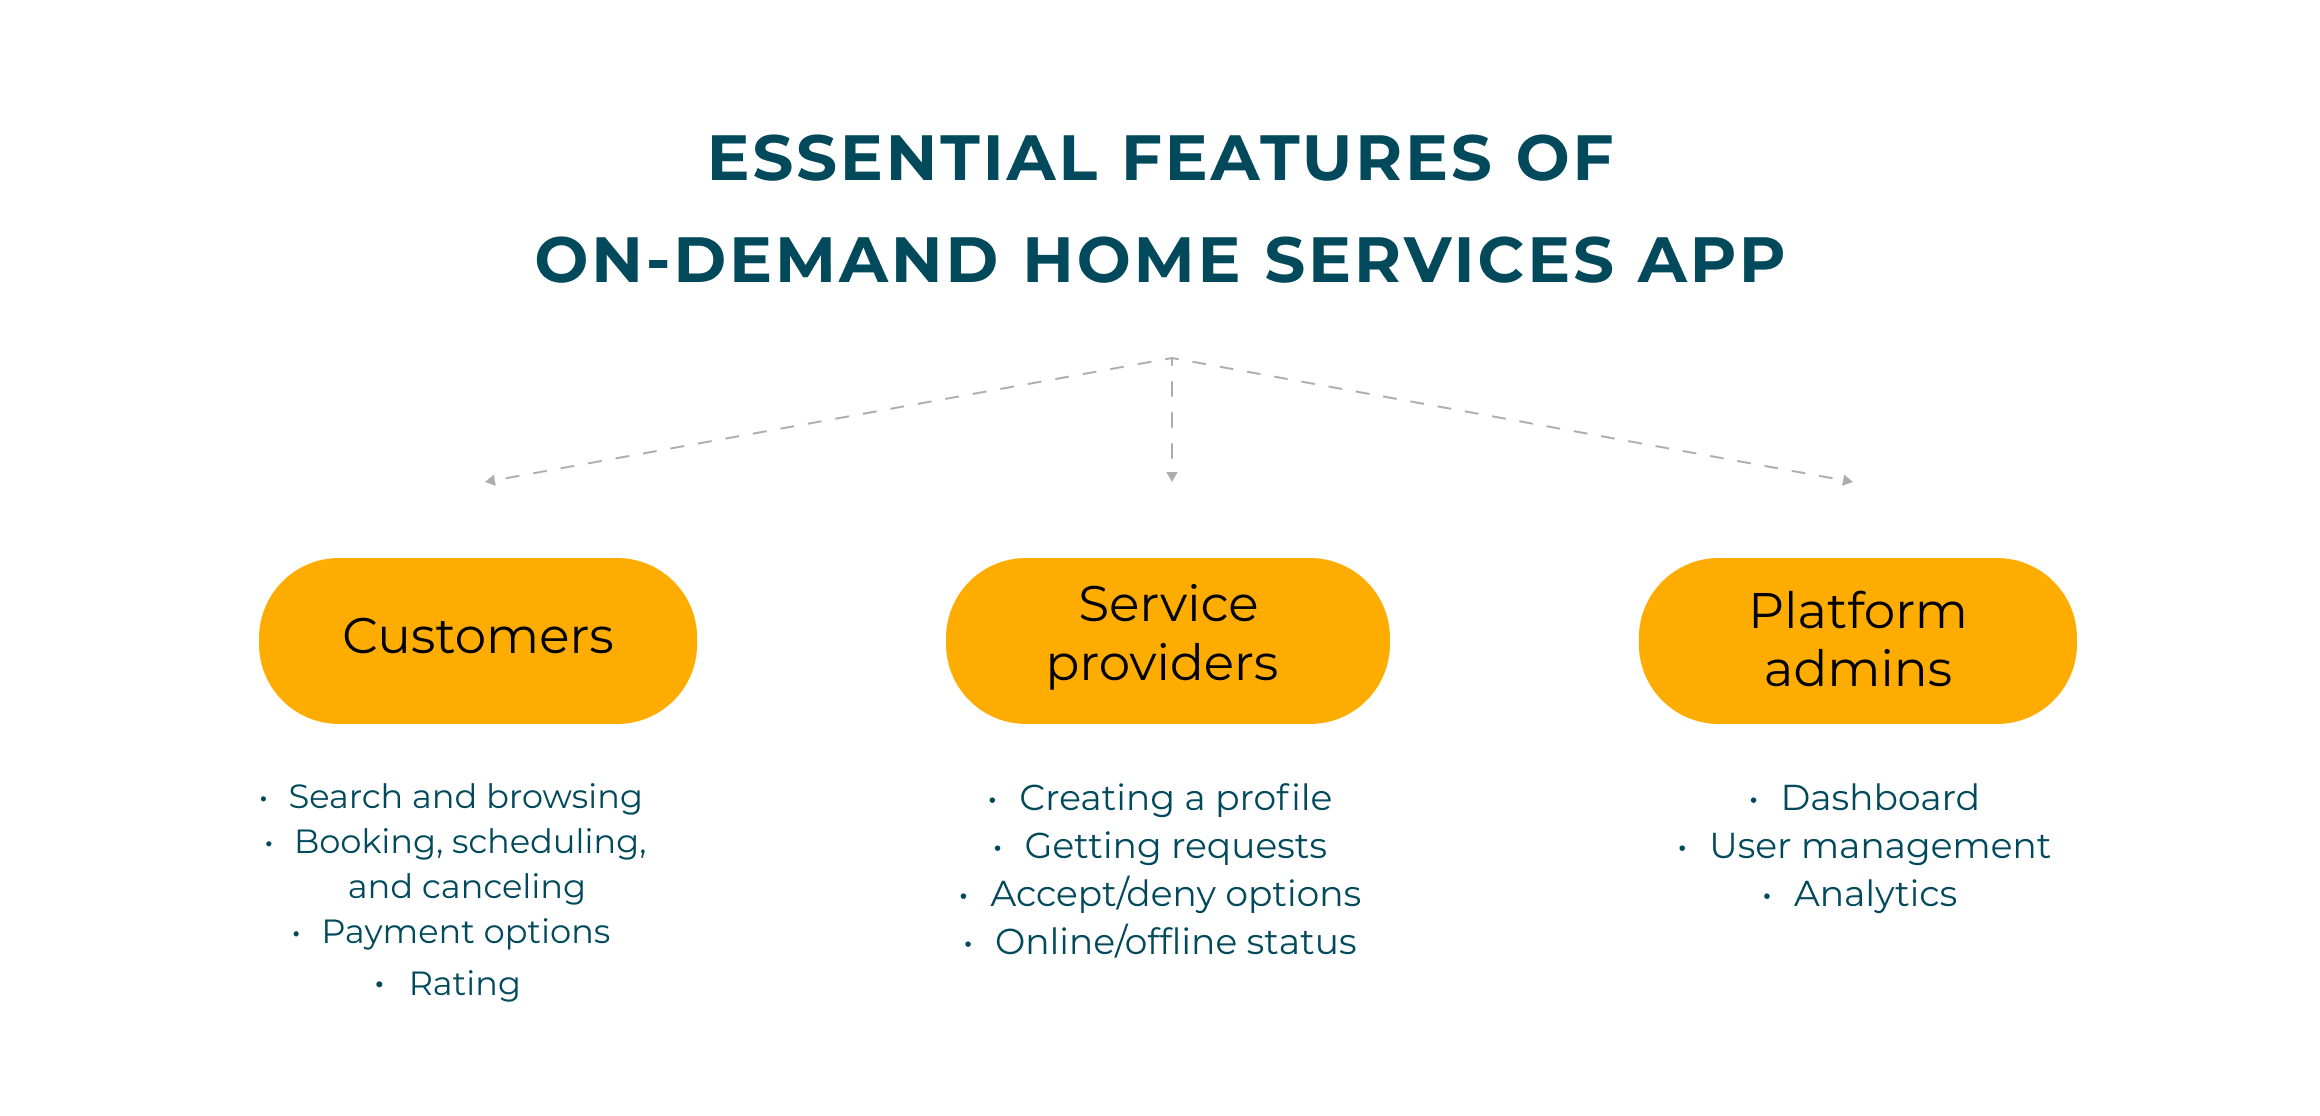 Features of on-demand home services 